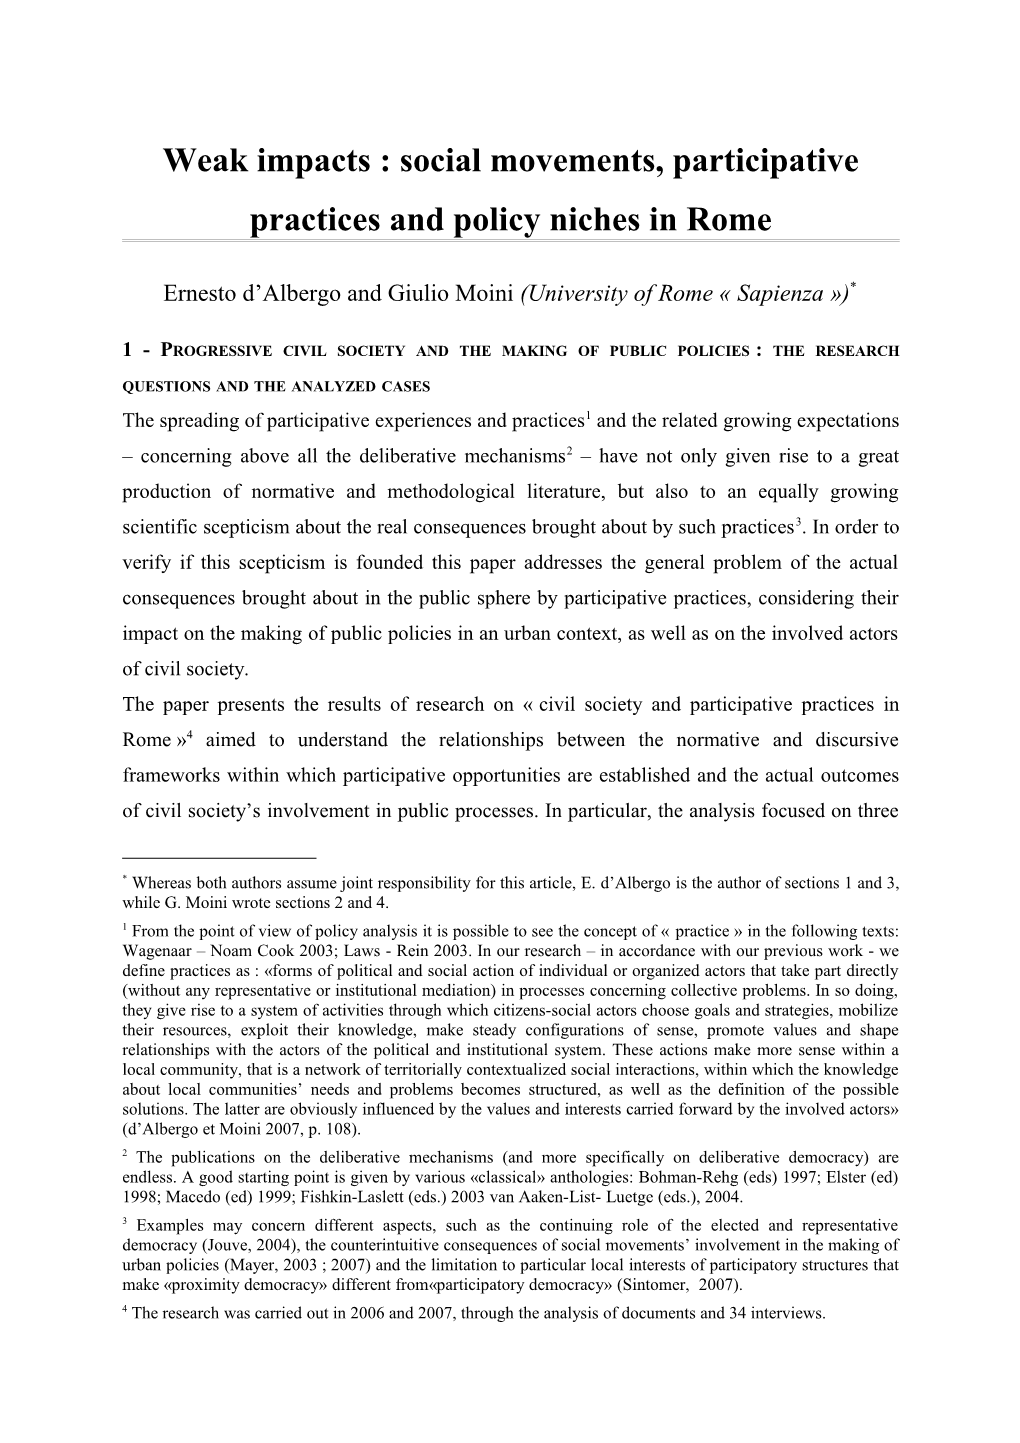 Weak Impacts : Social Movements, Participative Practices and Policy Niches in Rome